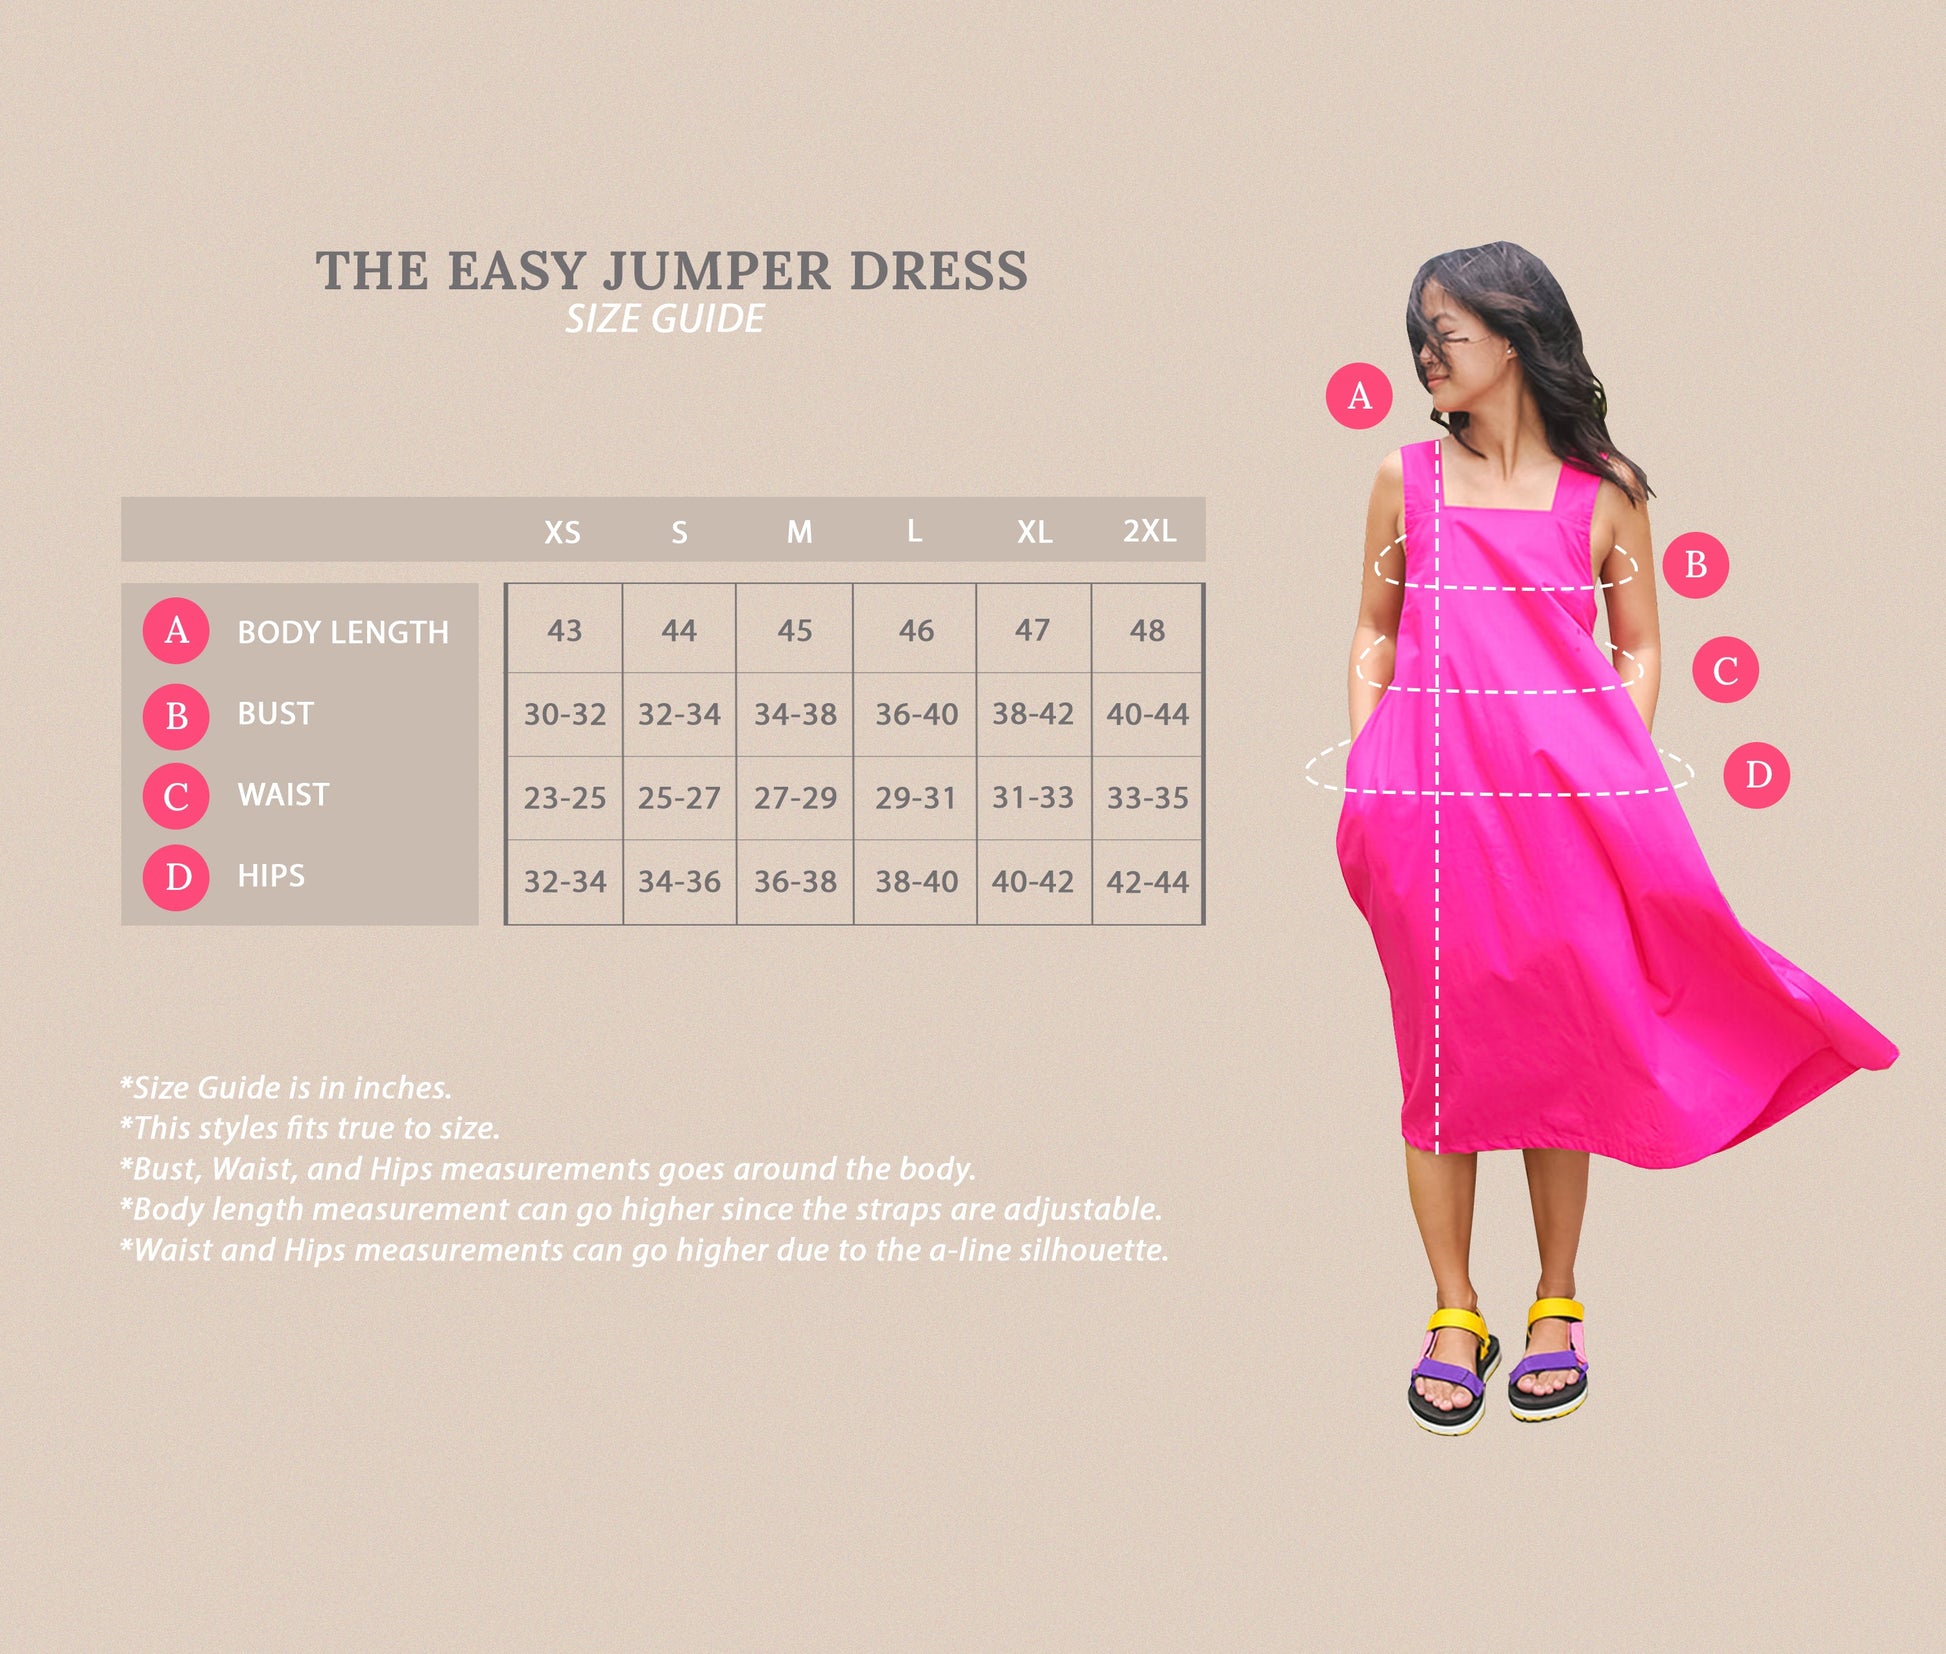 The Easy Jumper Dress Pink Fashion Rags2Riches